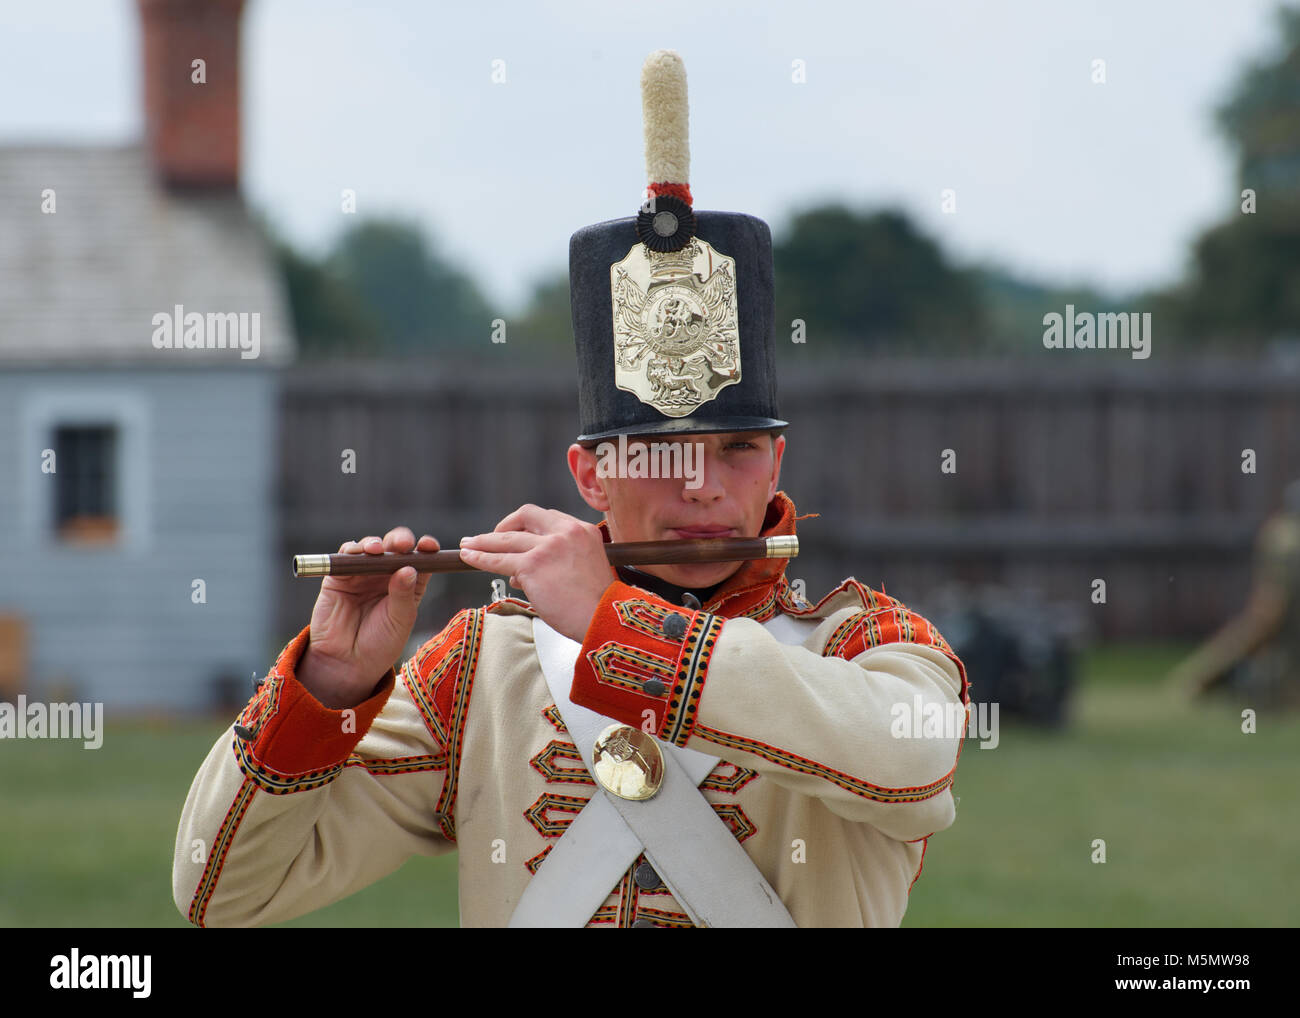 A member of the Fife and Drum band performing at Fort George National Historic Site, Niagara-on-the-Lake, Ontario, Canada Stock Photo